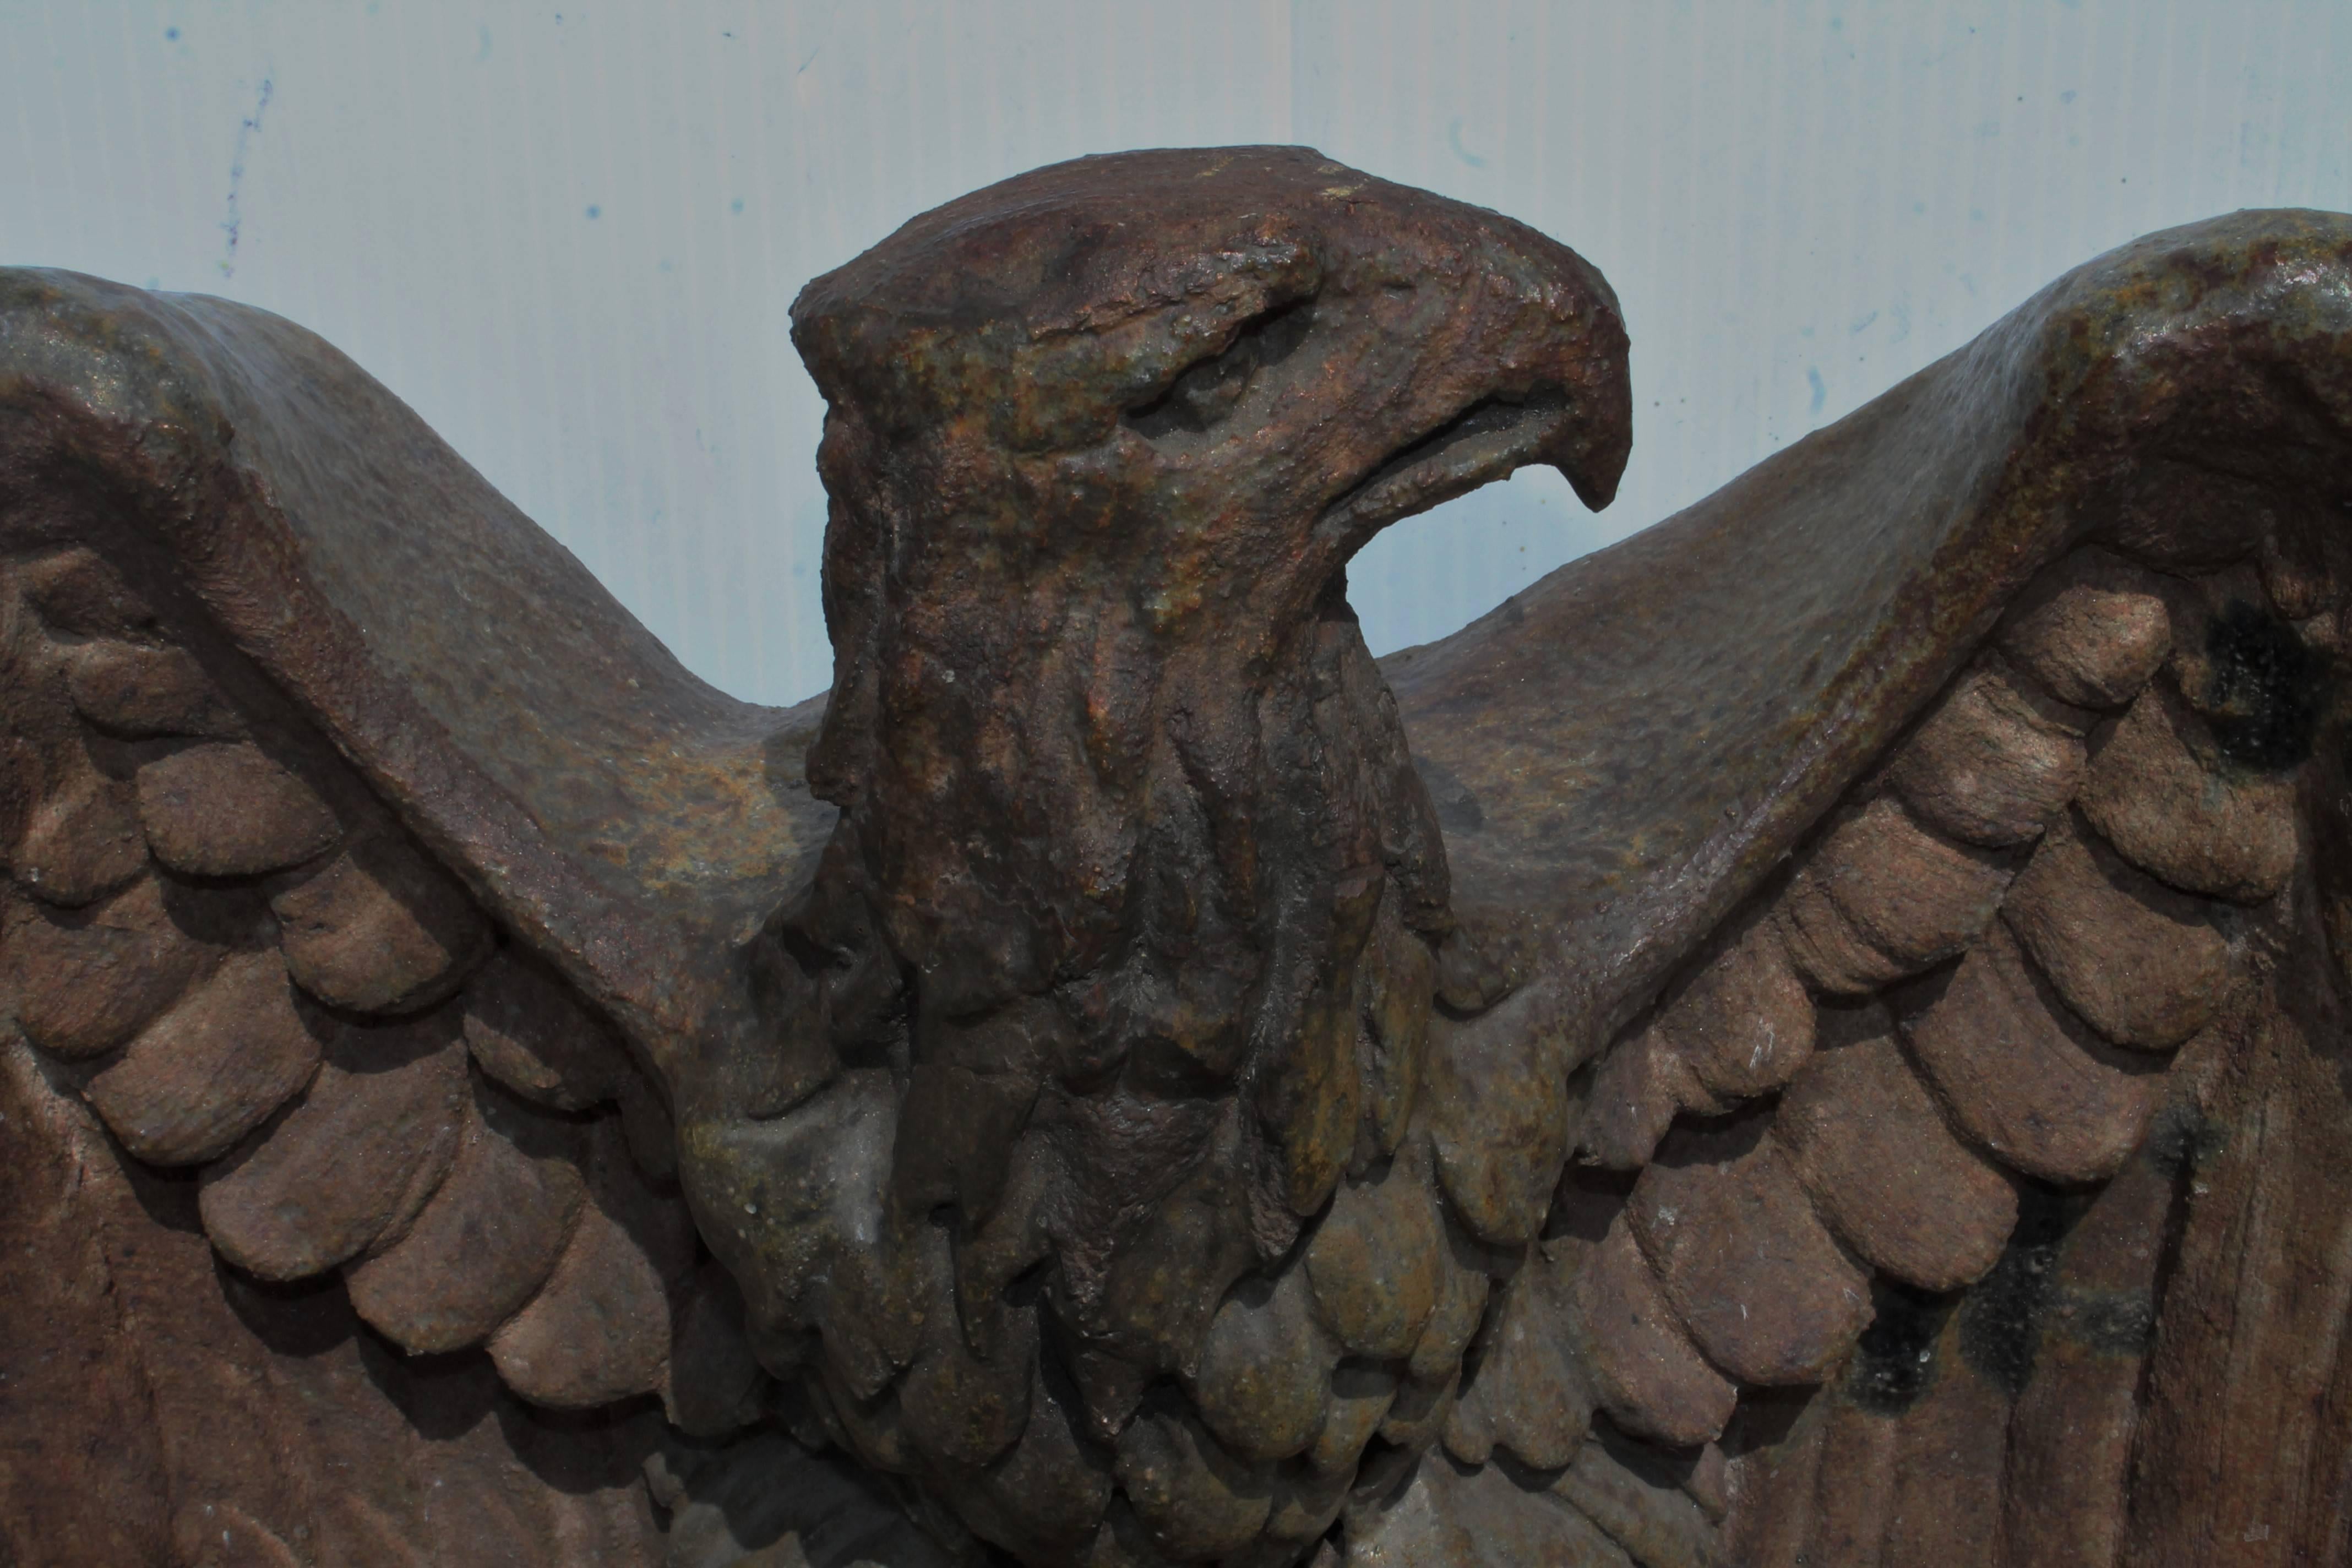 This amazing Folk Art sculpture of 19th century sewer tile or pottery eagle was from a private collection in New England. This item is on a custom-made cast iron stand.